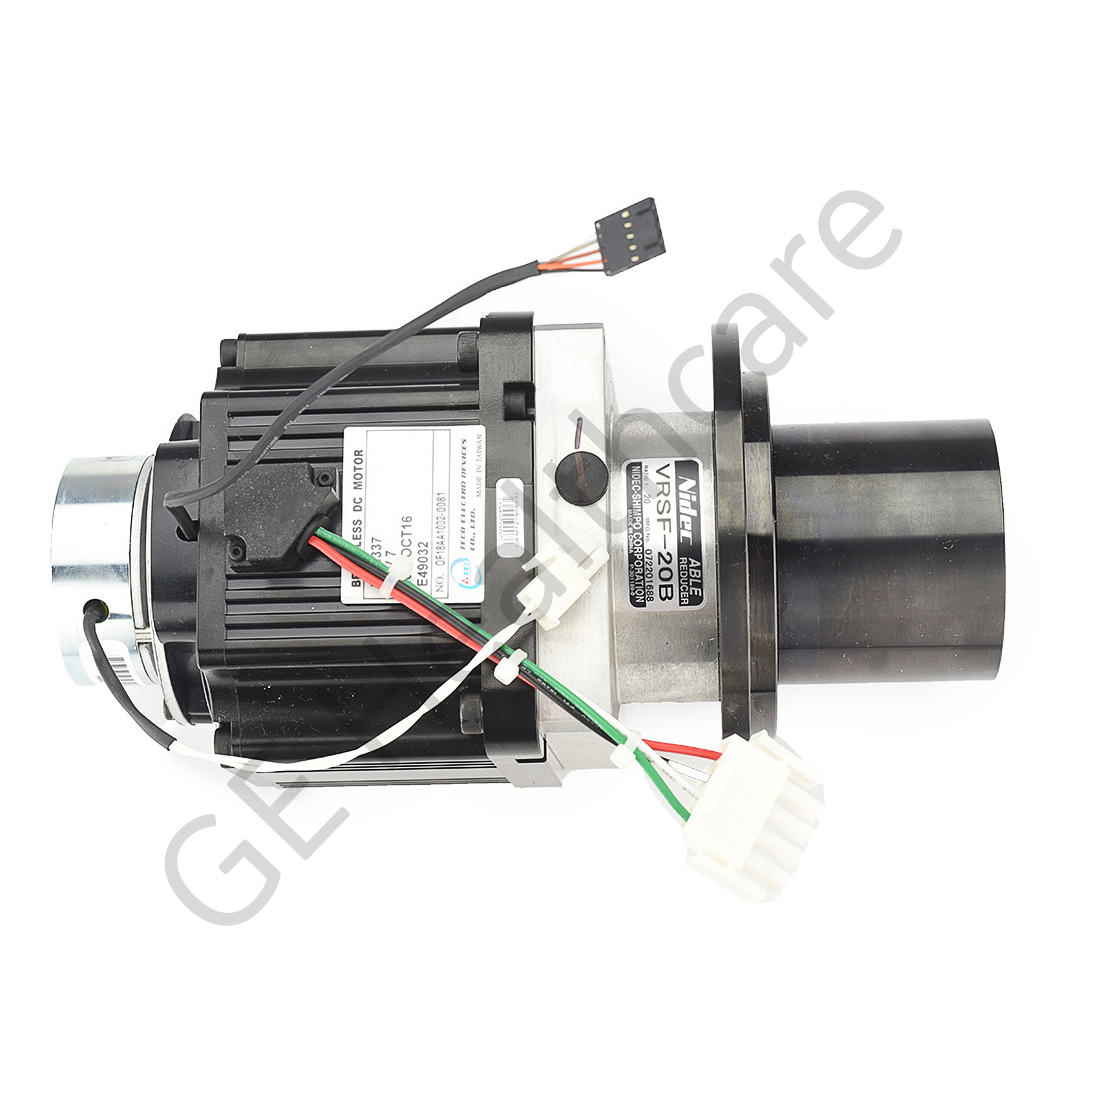 Motor Reducer Assembly with Brake 5479352-H